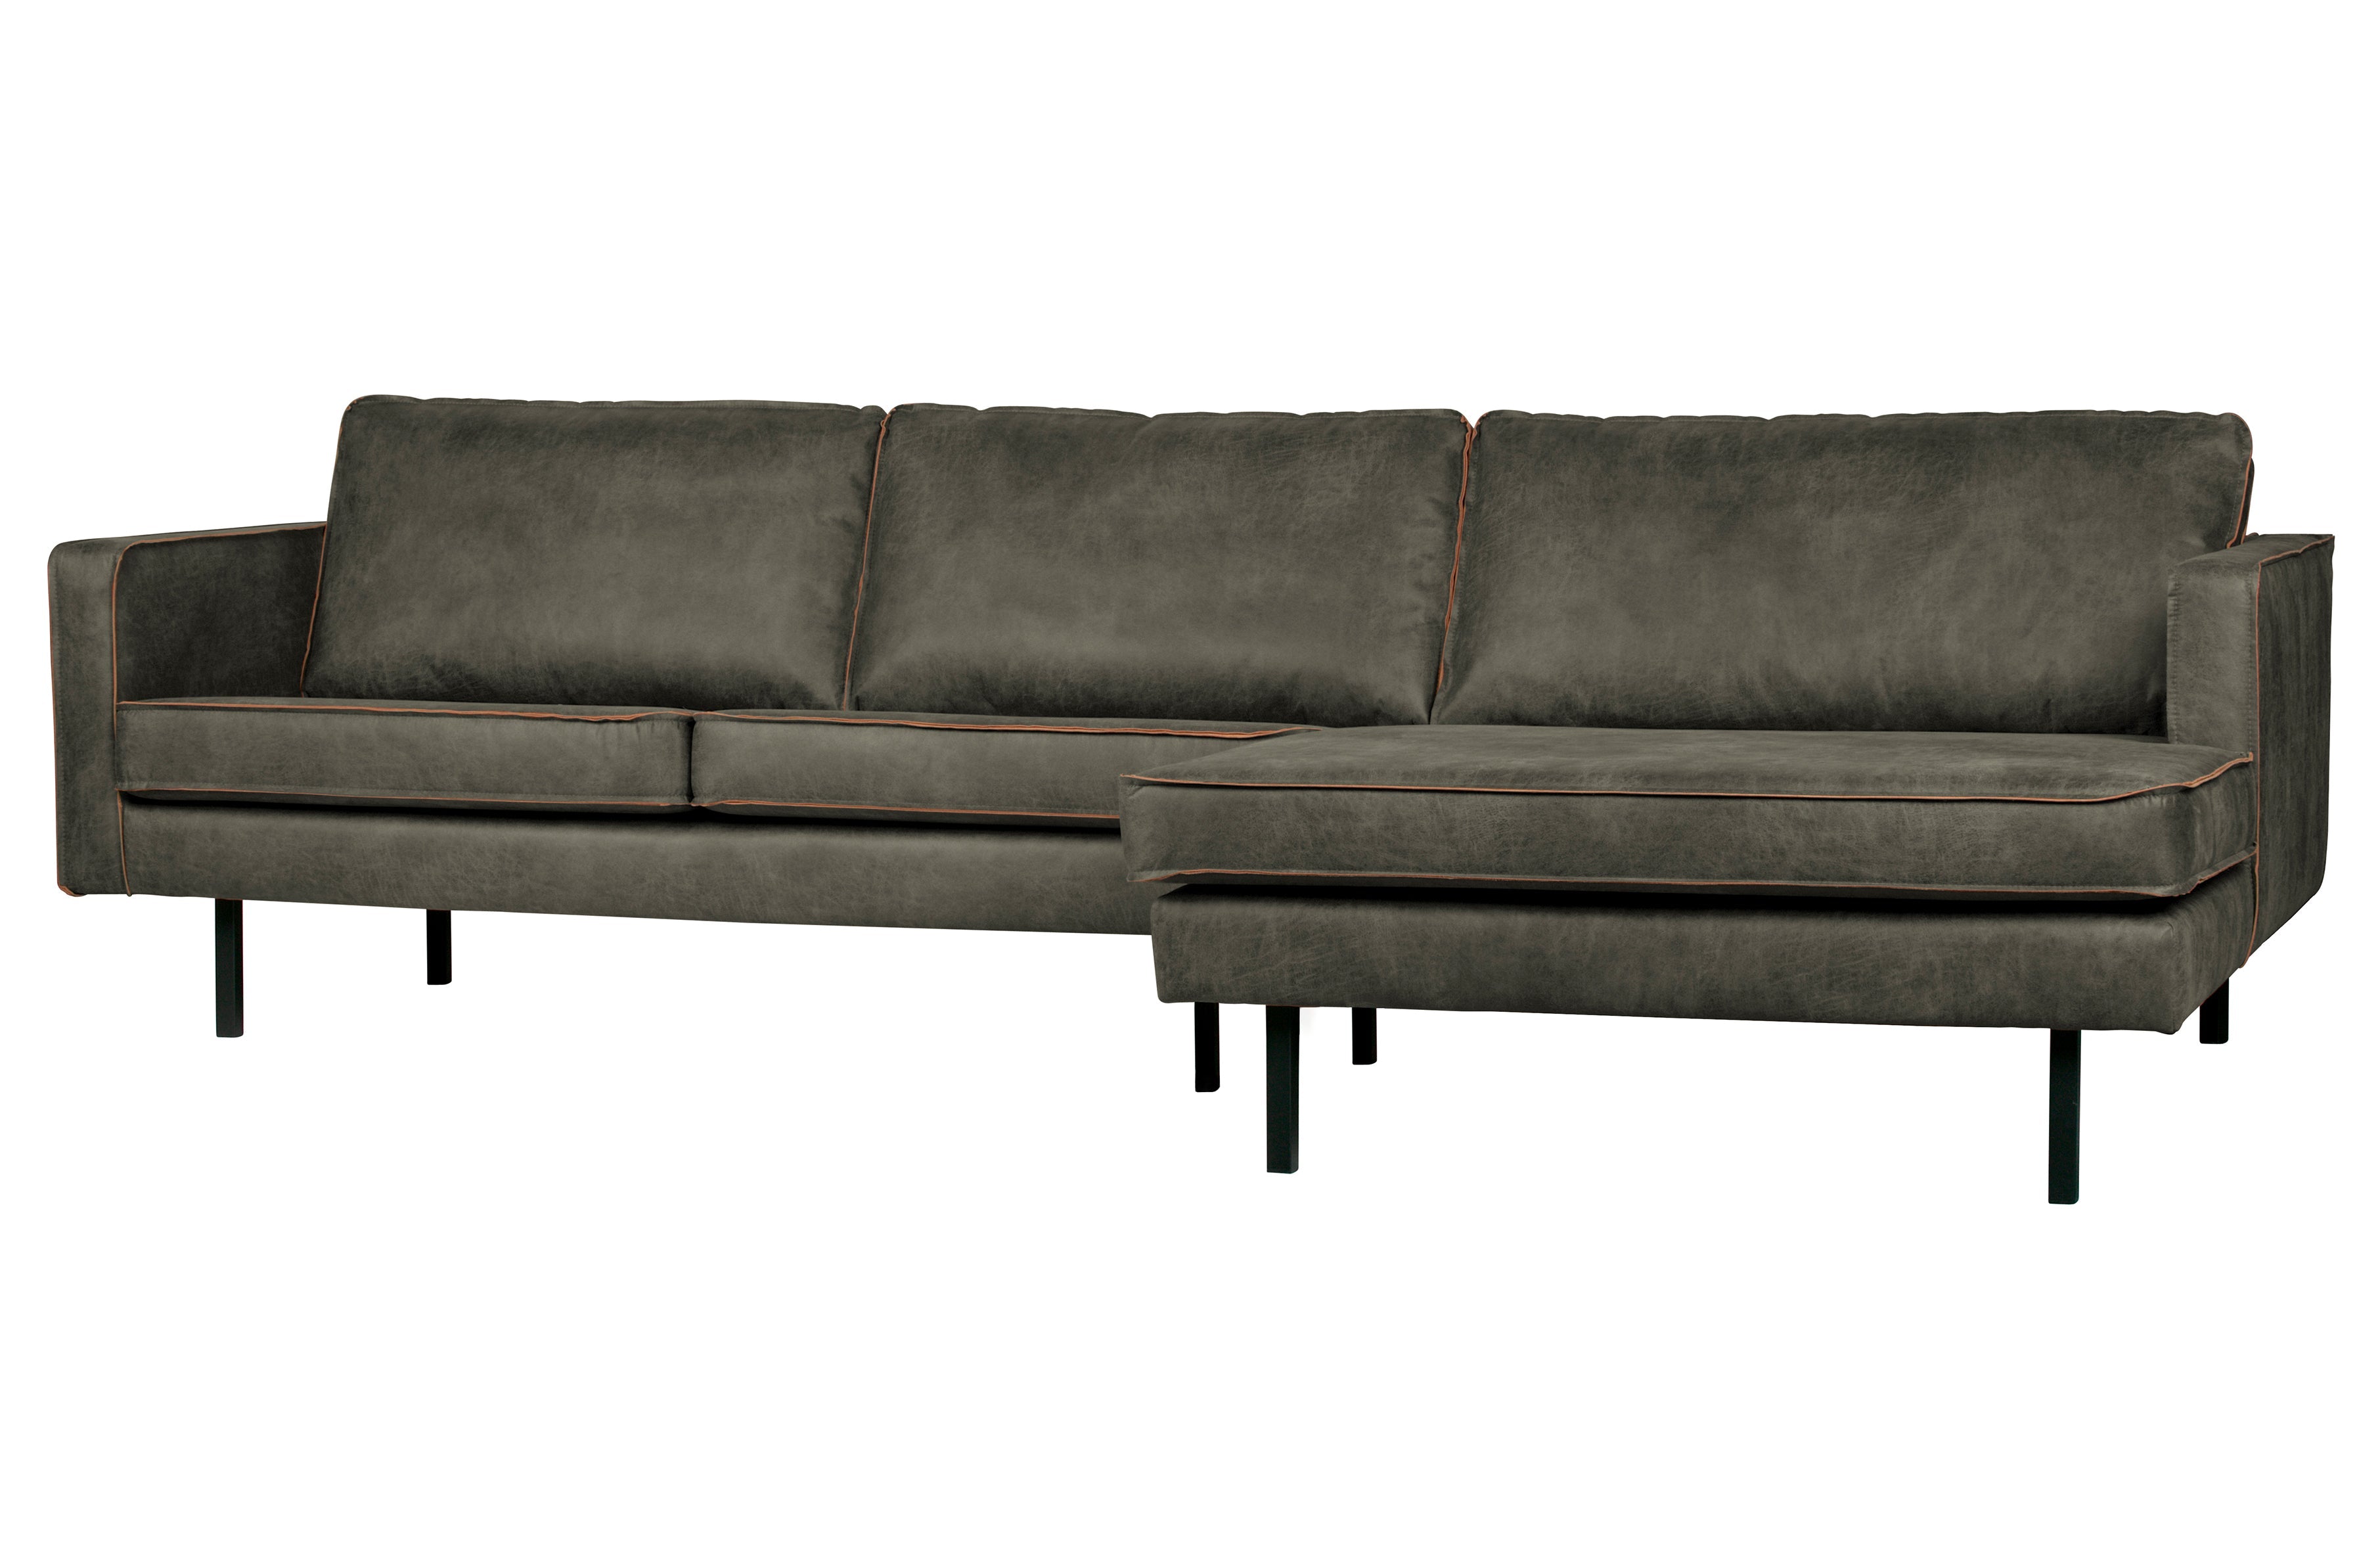 Rodeo Chaise Longue Rechts Army